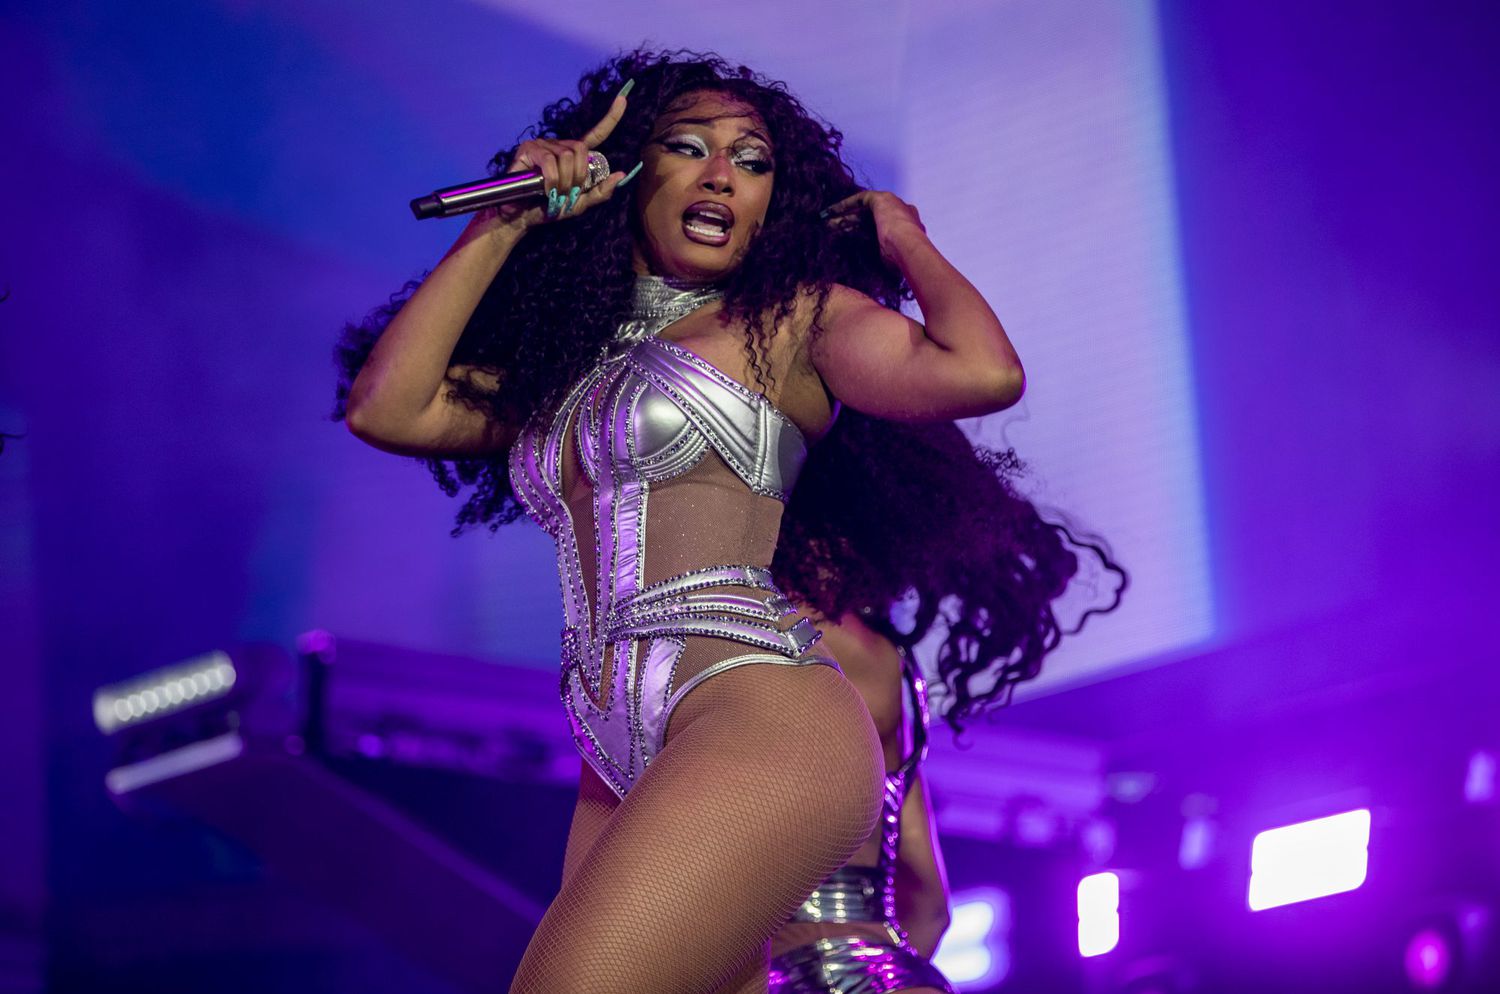 INDIO, CA - APRIL 16, 2022: Megan Thee Stallion performs on the main Coachella Stage on day two of the Coachella Music Festival on April 16, 2022 in Indio, California.(Gina Ferazzi / Los Angeles Times via Getty Images)